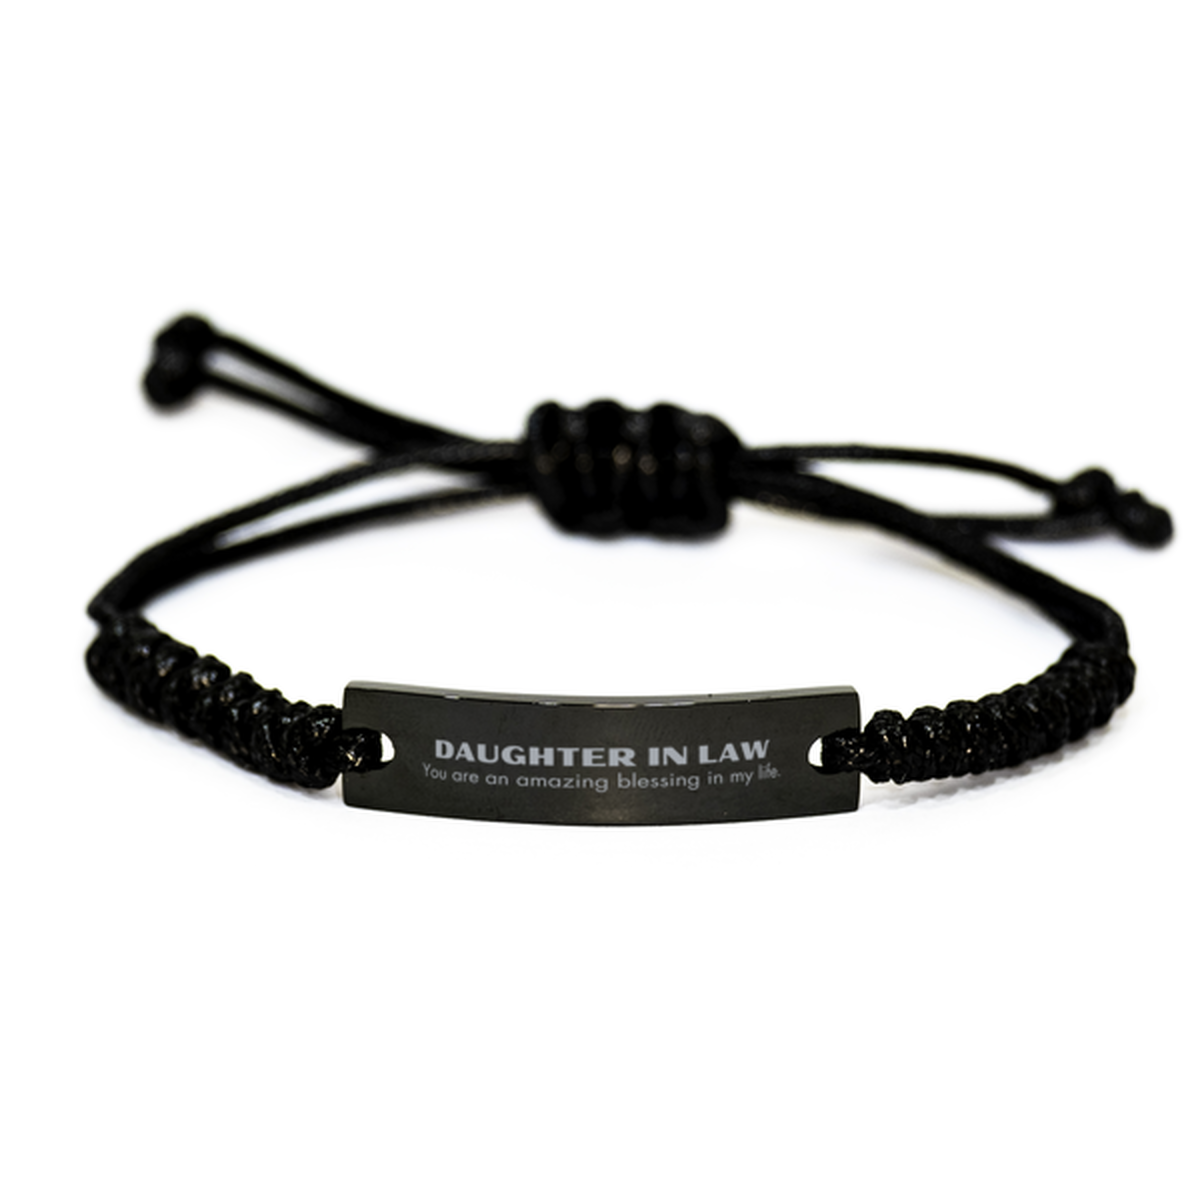 Daughter In Law Black Rope Bracelet, You are an amazing blessing in my life, Thank You Gifts For Daughter In Law, Inspirational Birthday Christmas Unique Gifts For Daughter In Law